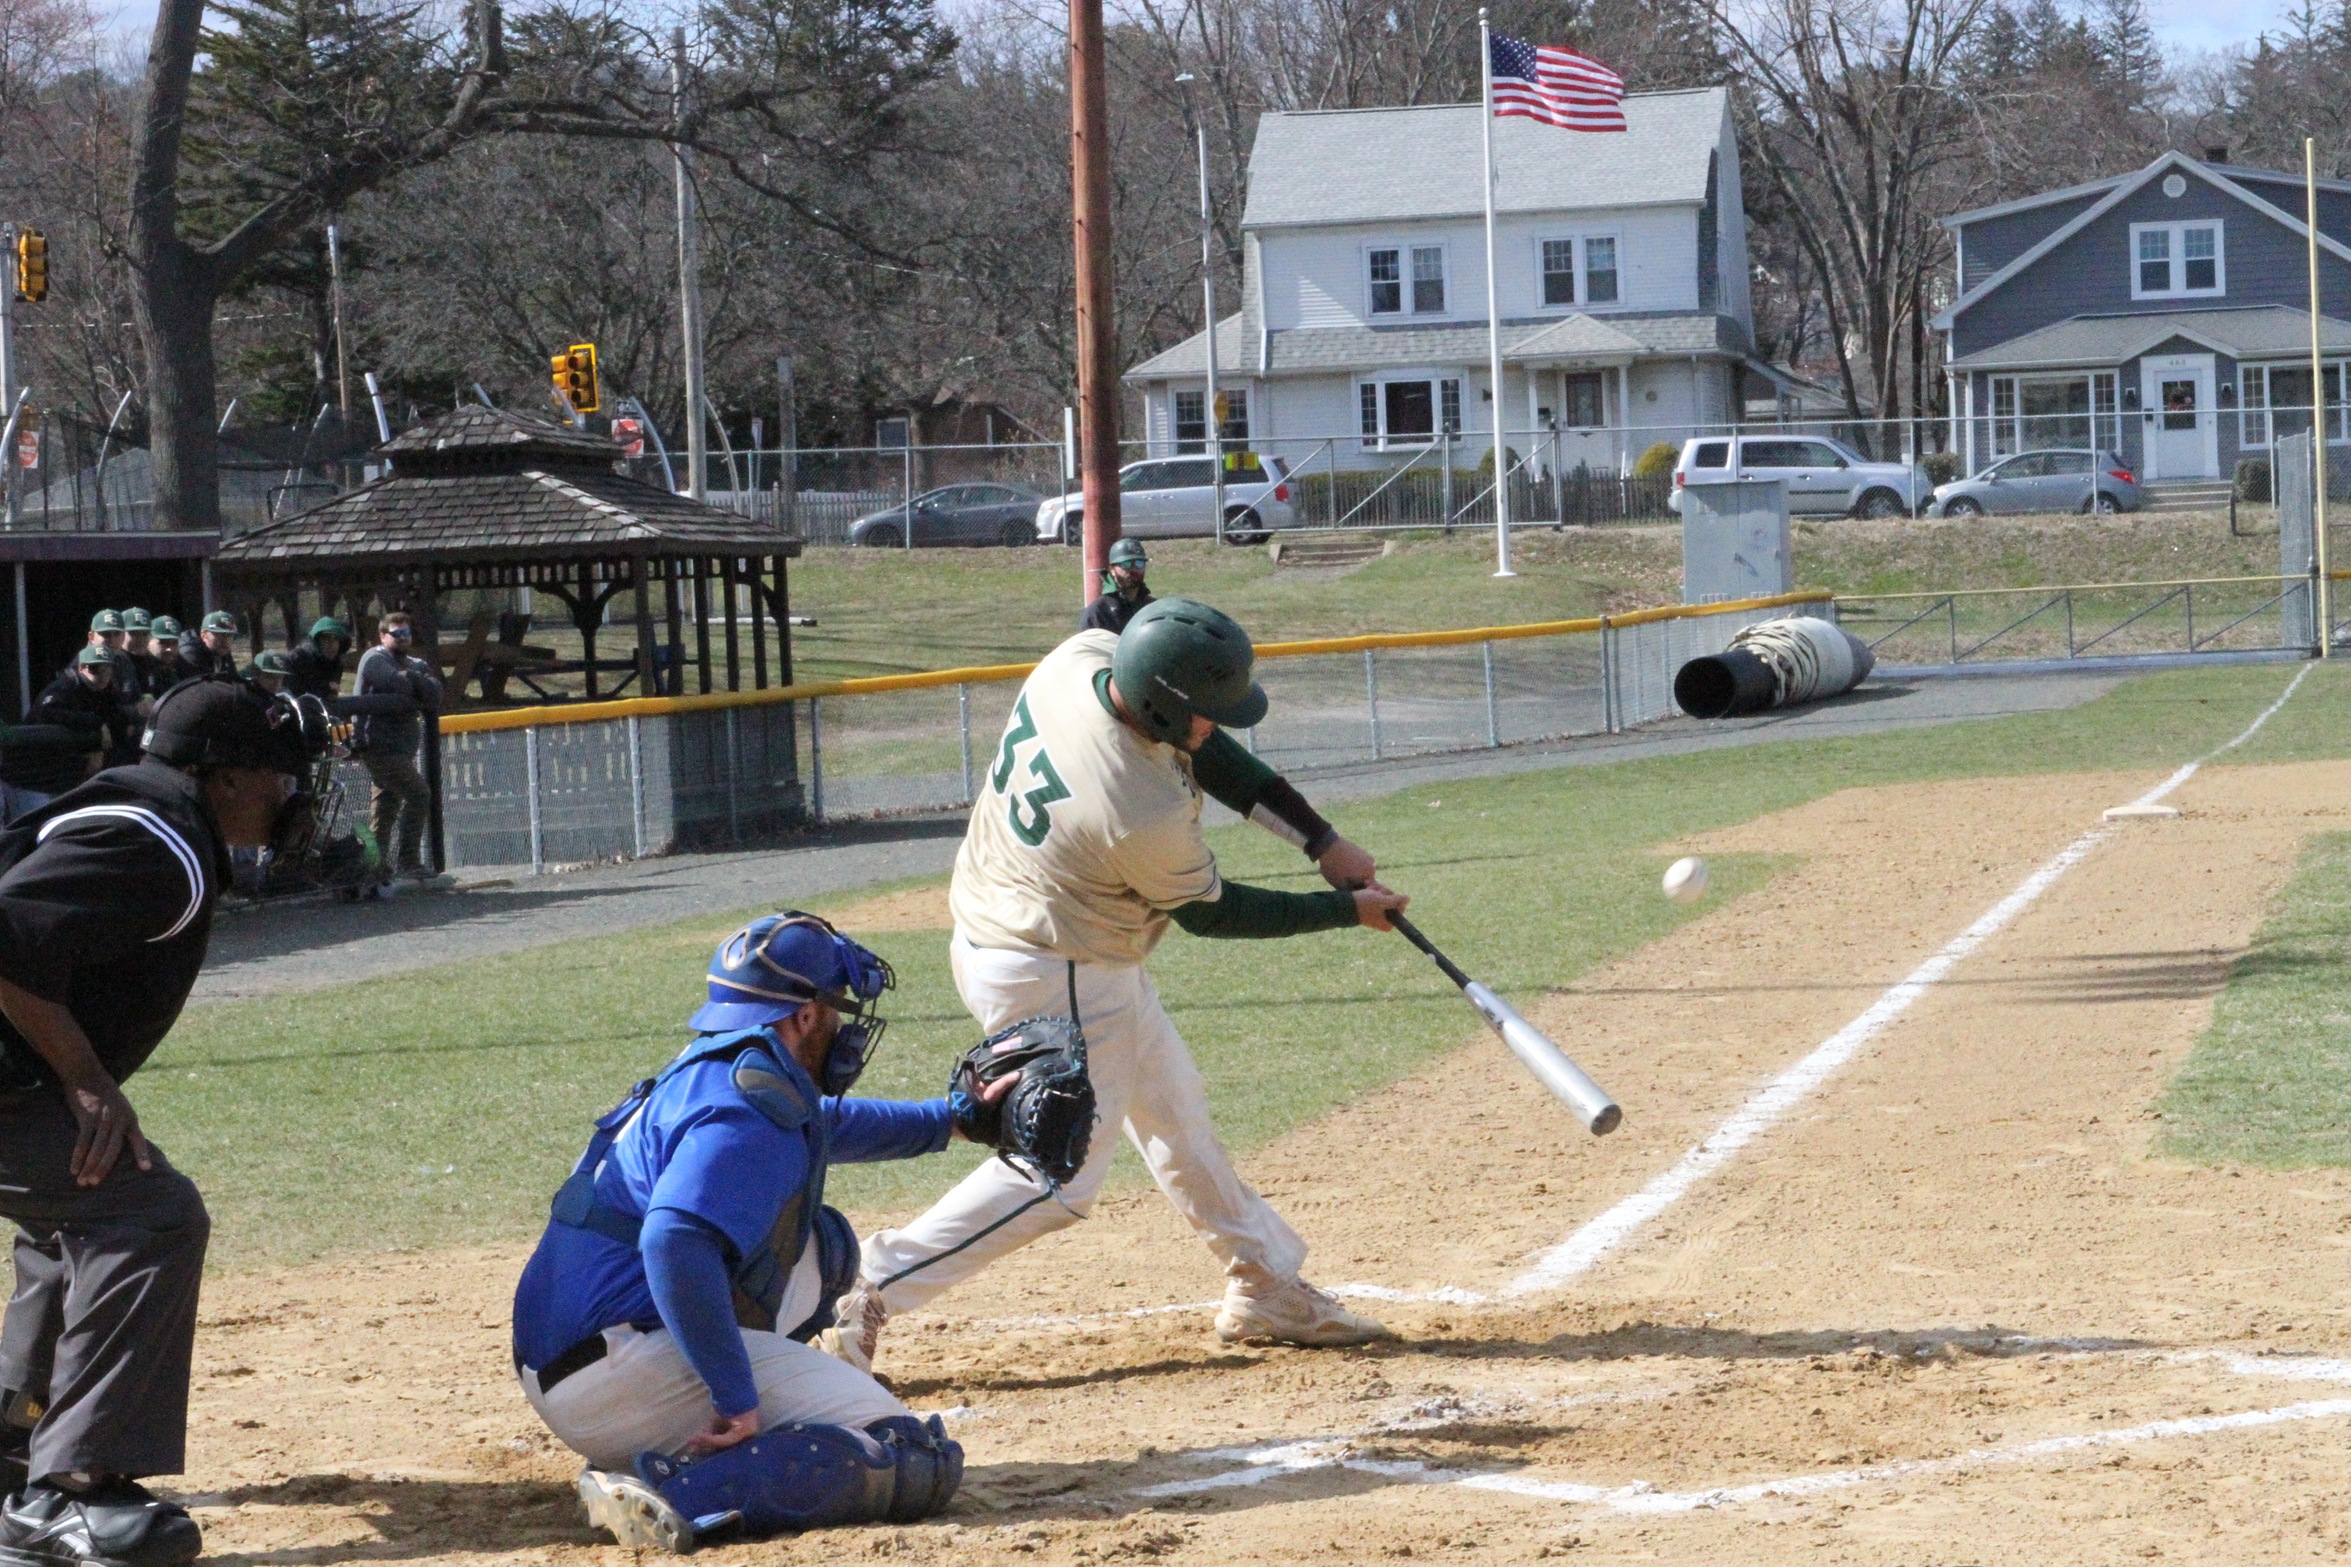 Galenski Had 4 RBI In Second Game to help Blazers Surge to Double Header Win Over Beavers